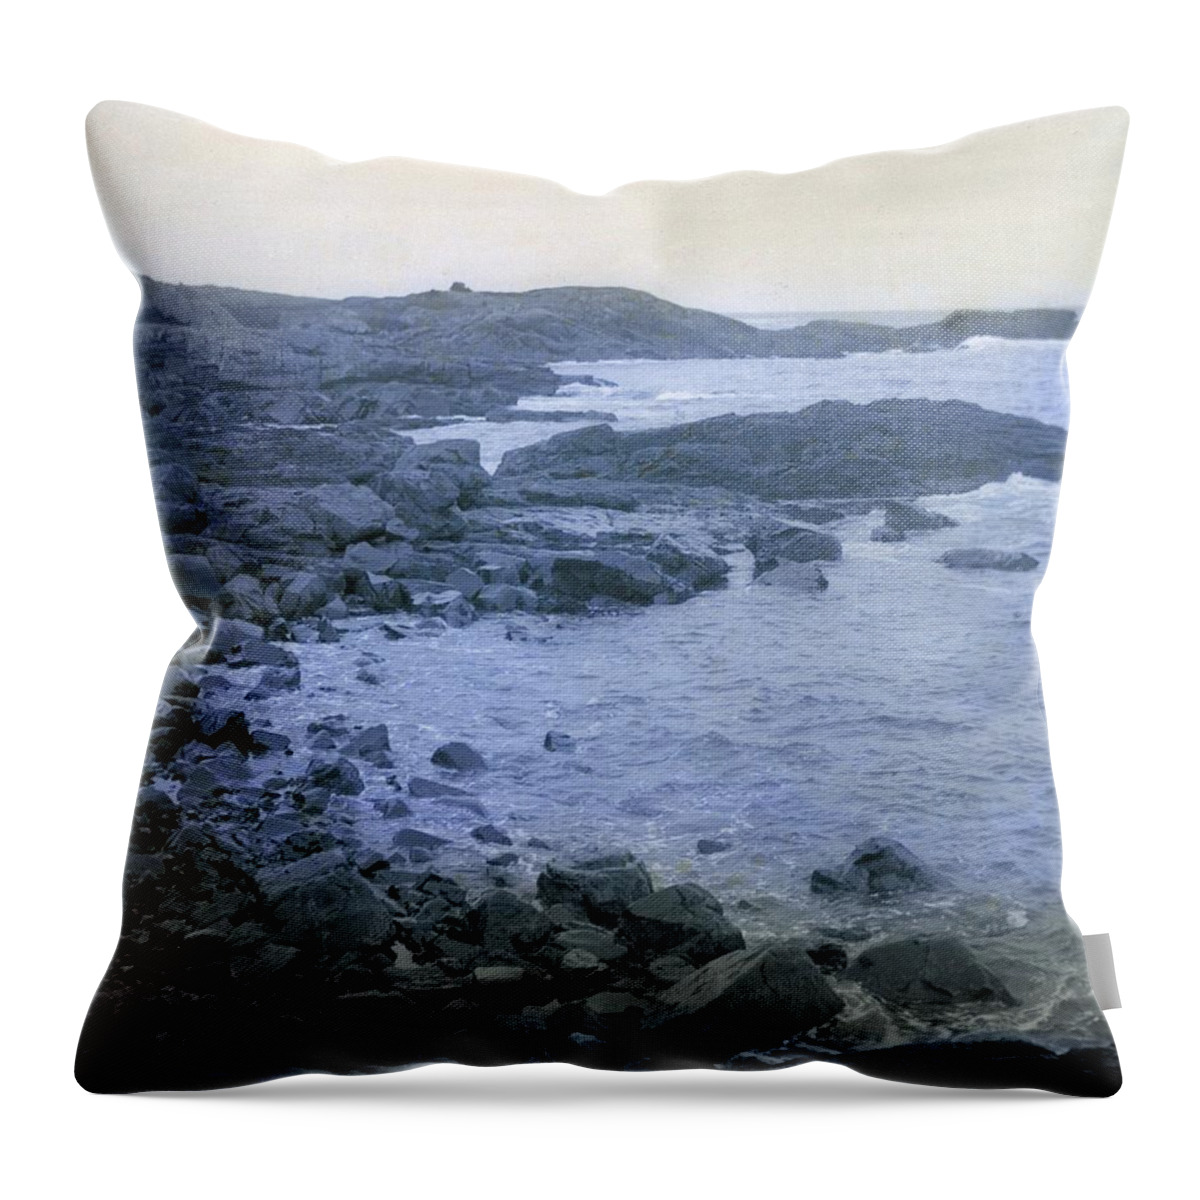 Ocaan Throw Pillow featuring the photograph Rocky Coast by William Haggart